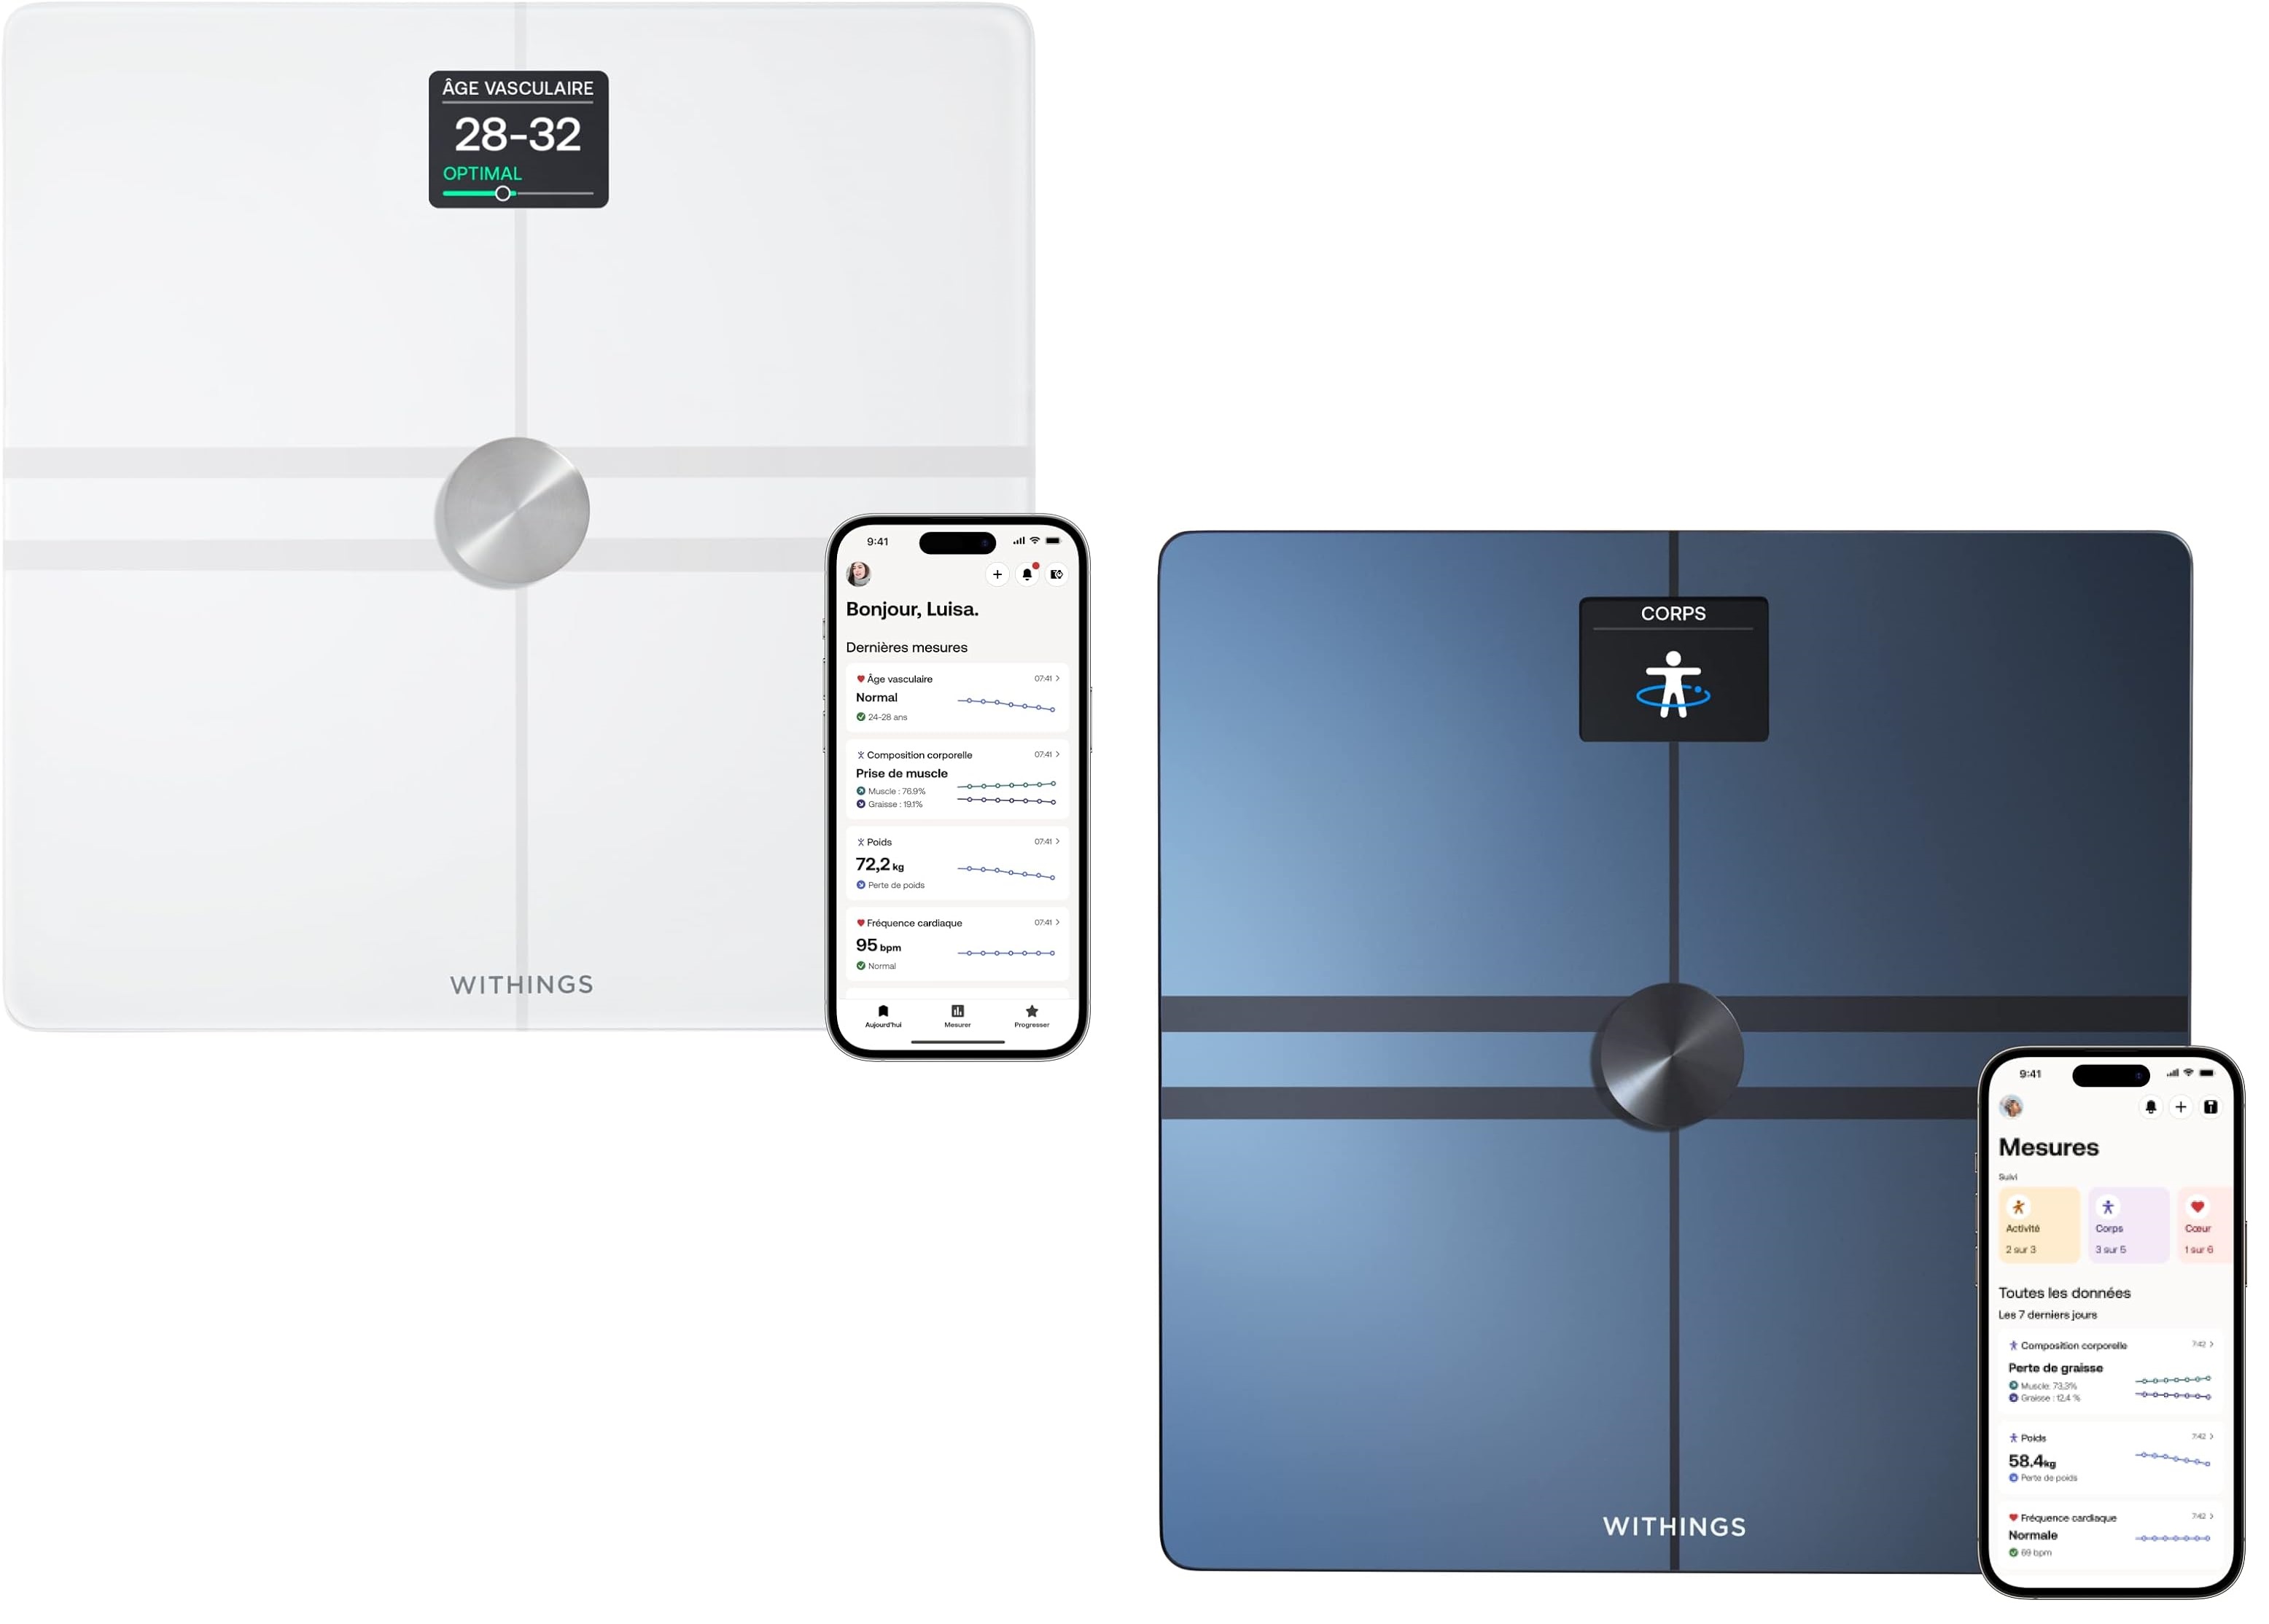 Withings - Body Smart Advanced Body Composition Smart Wi-Fi Scale - White